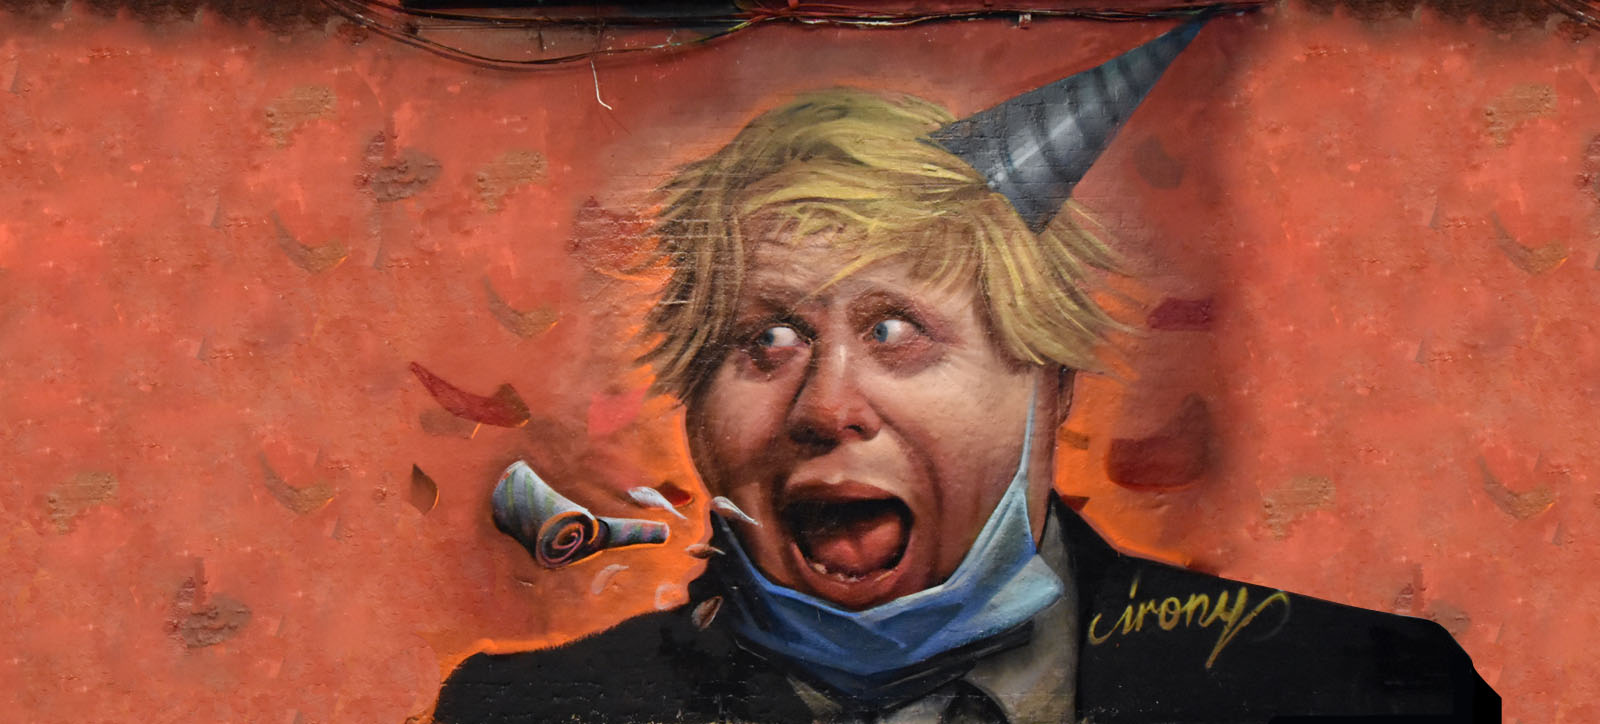 Image Credit: Duncan C. A mural of UK Prime Minister Boris Johnson wearing a party hat with his facemask pulled down, satirising the pandemic response and 'partygate' scandal.